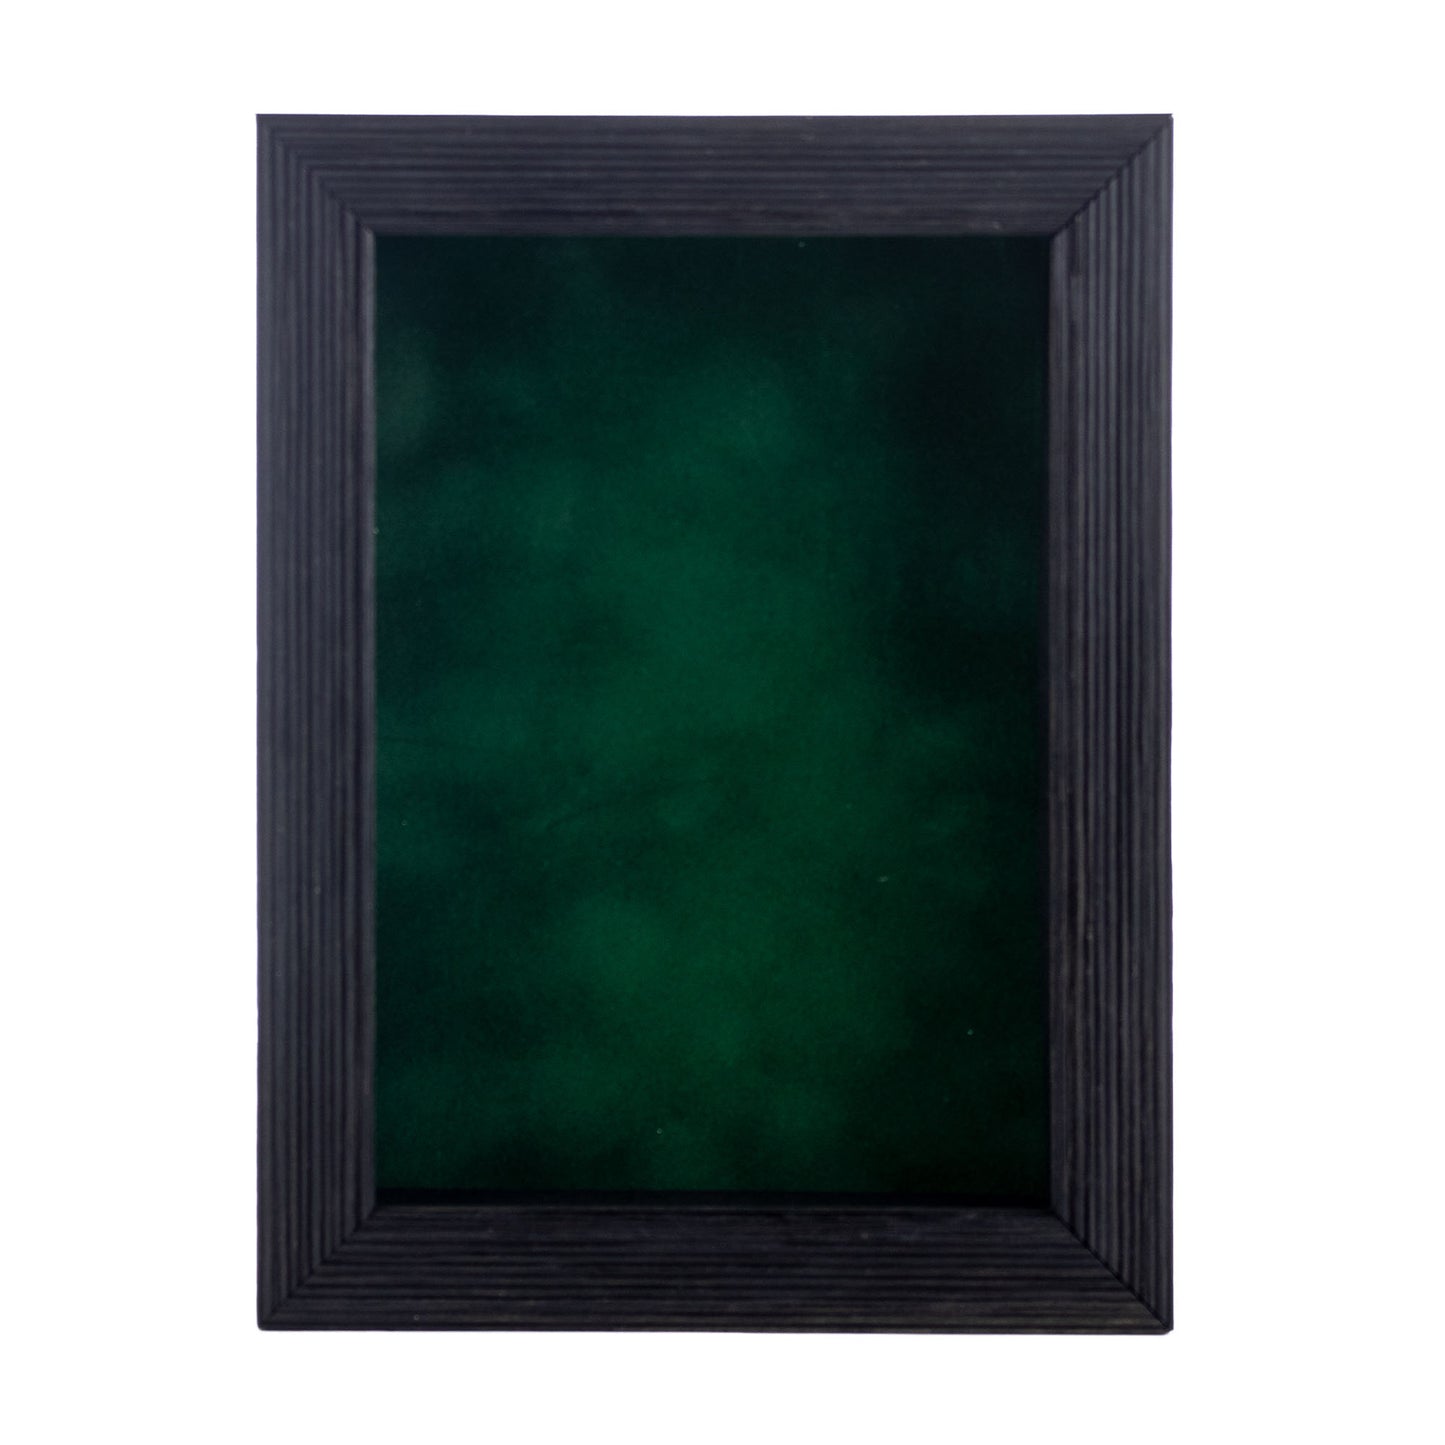 Distressed Black Shadow Box Frame With Forest Green Acid-Free Suede Backing